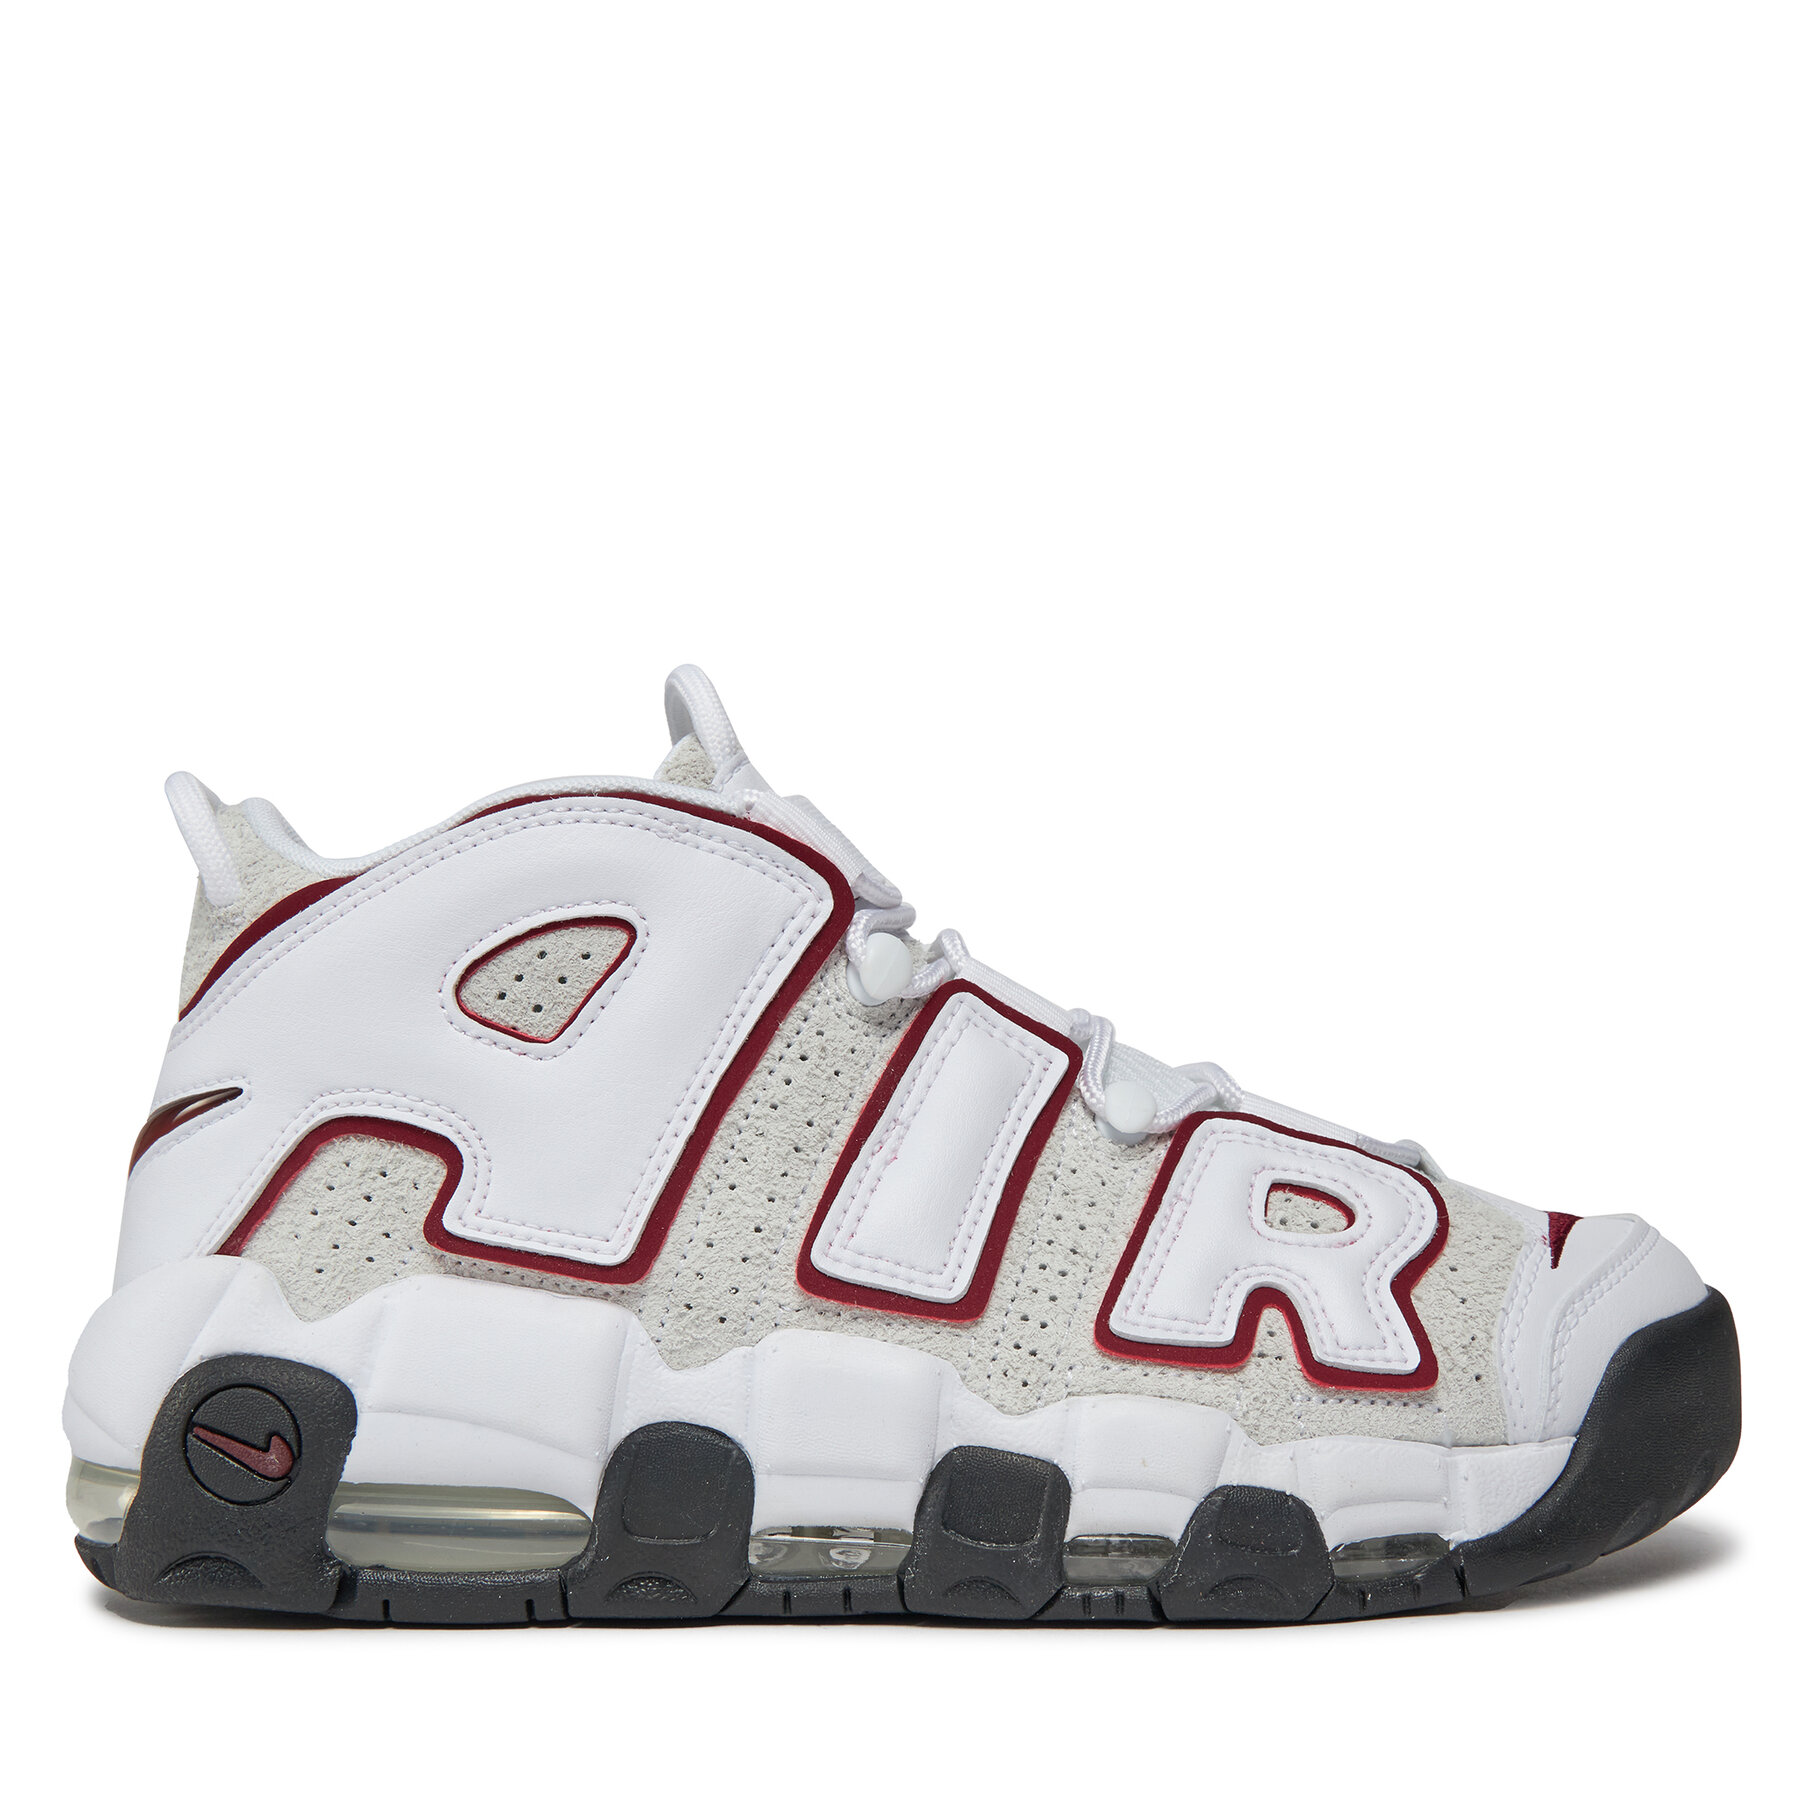 Sneakers Nike Air More Uptempo '96 FB1380 100 Weiß von Nike